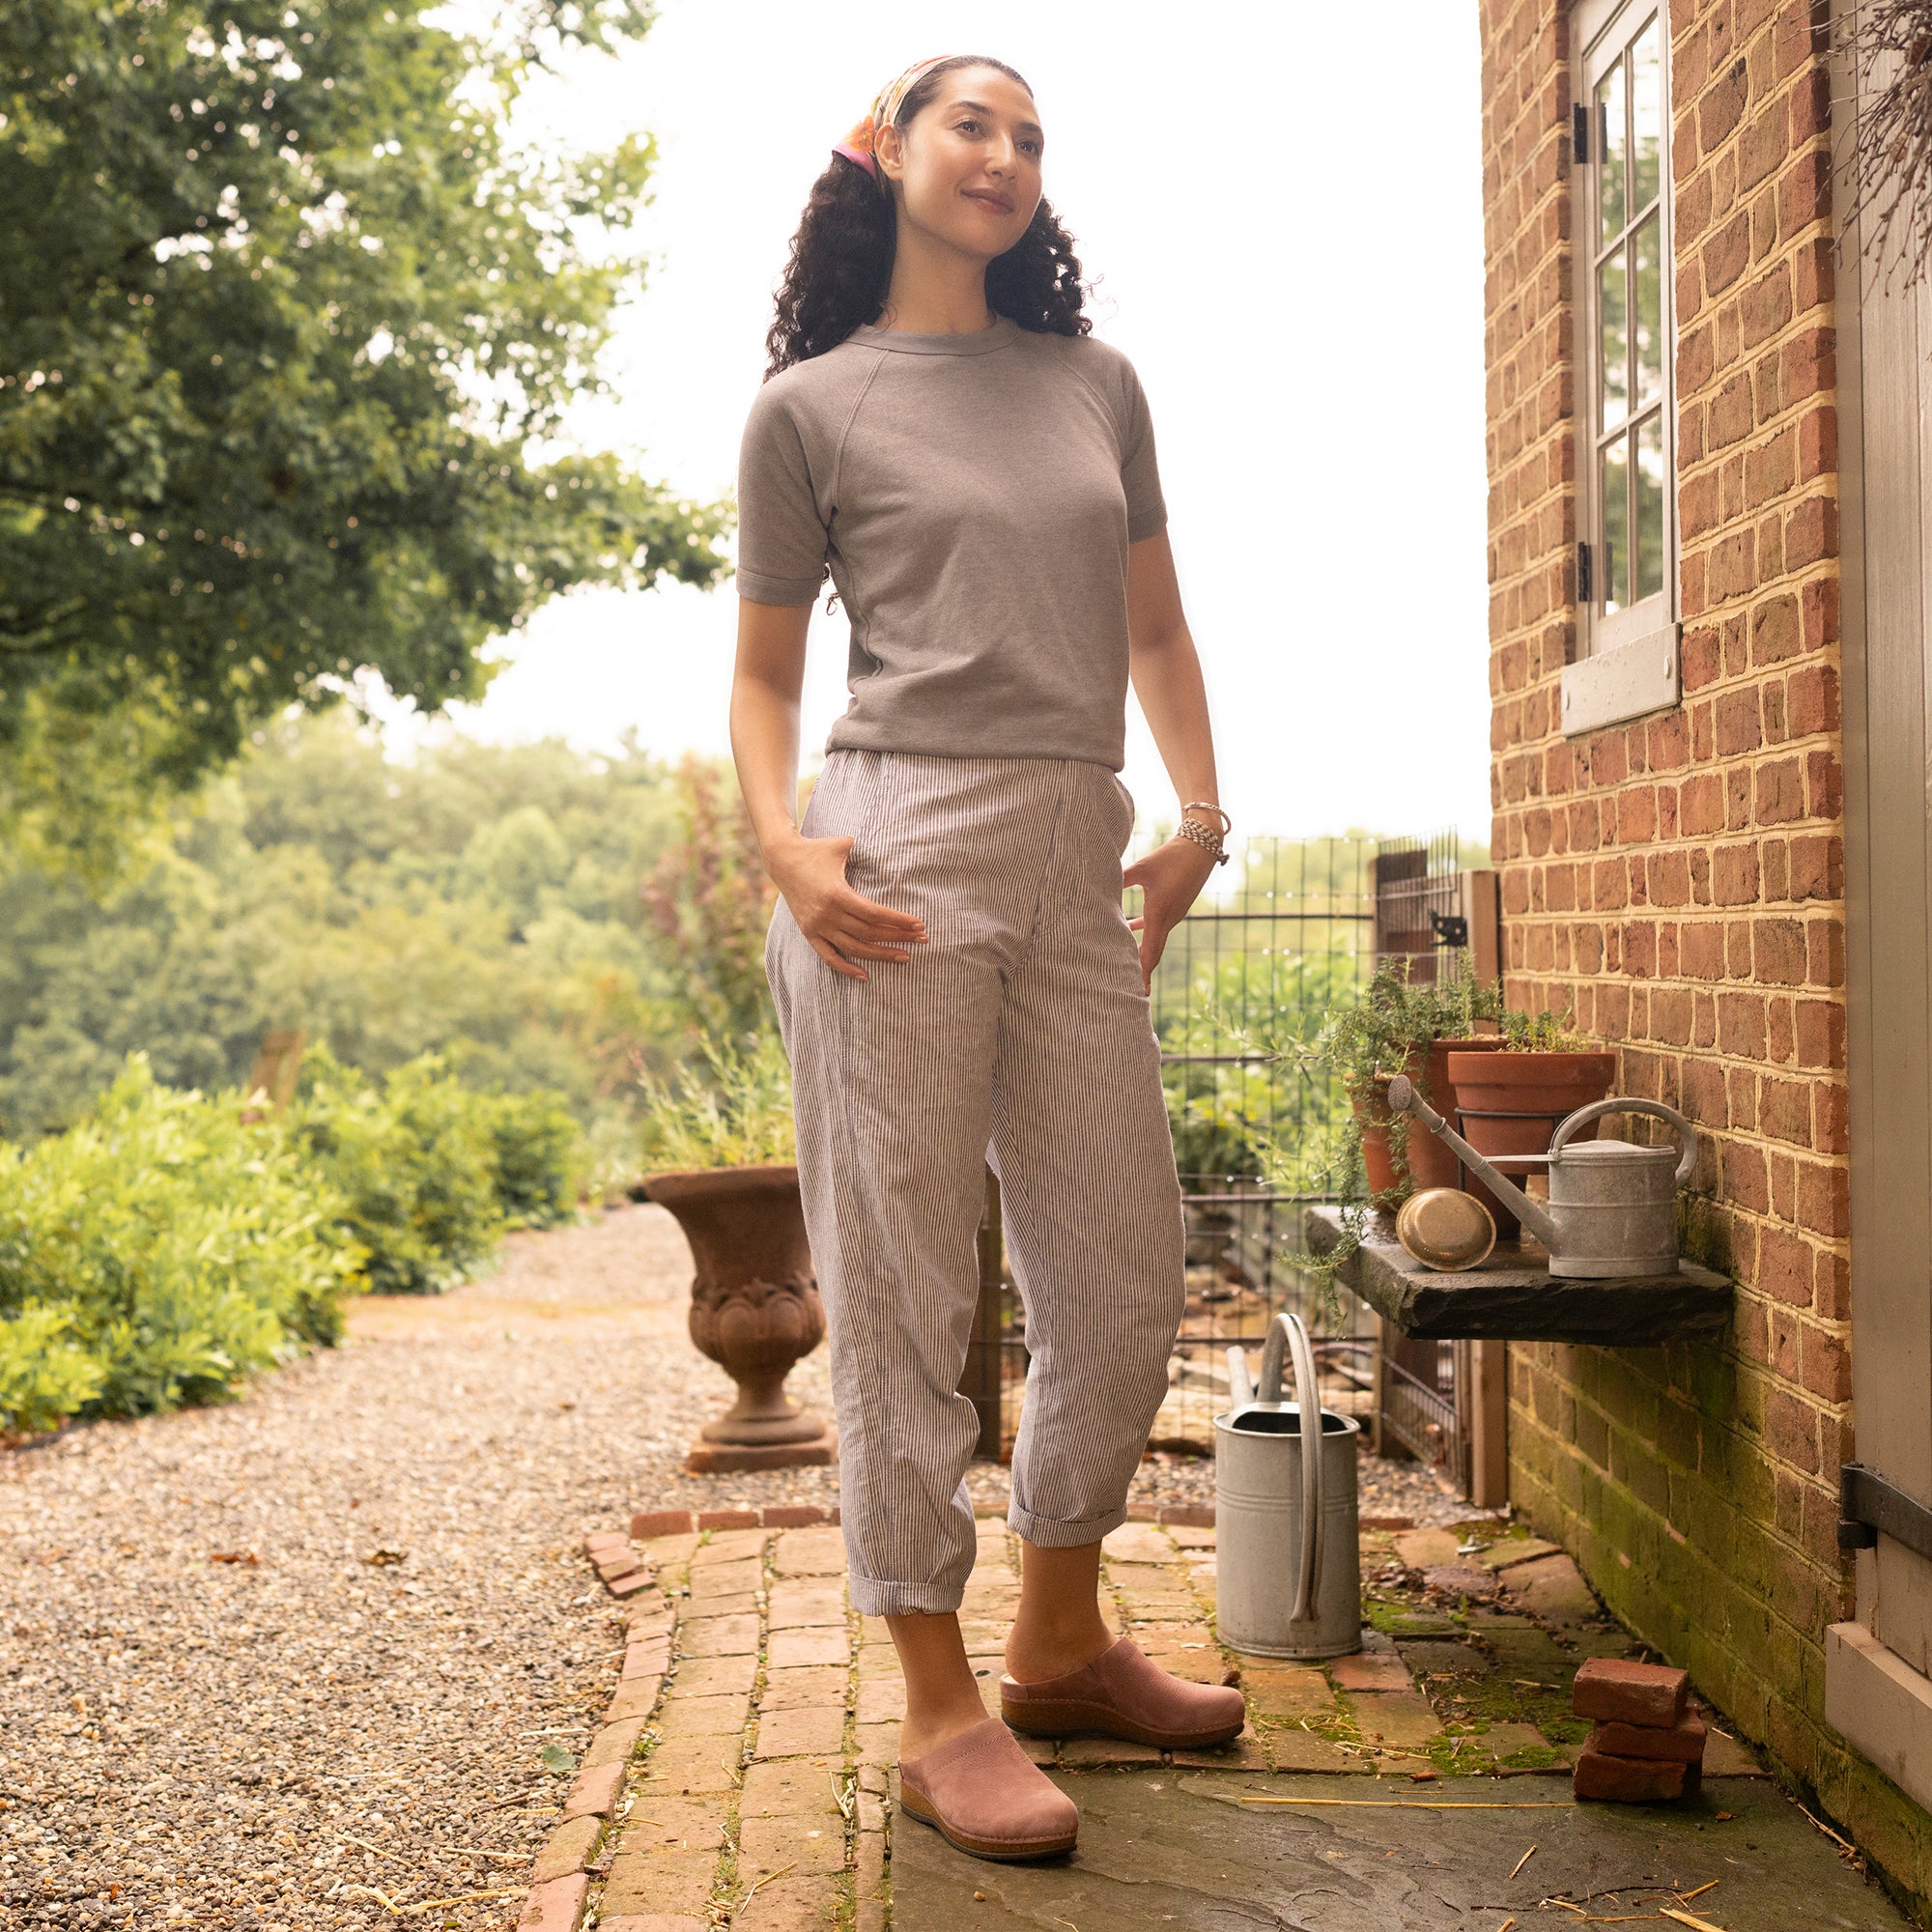 A woman in a comfortable outfit including light pink mule clogs.